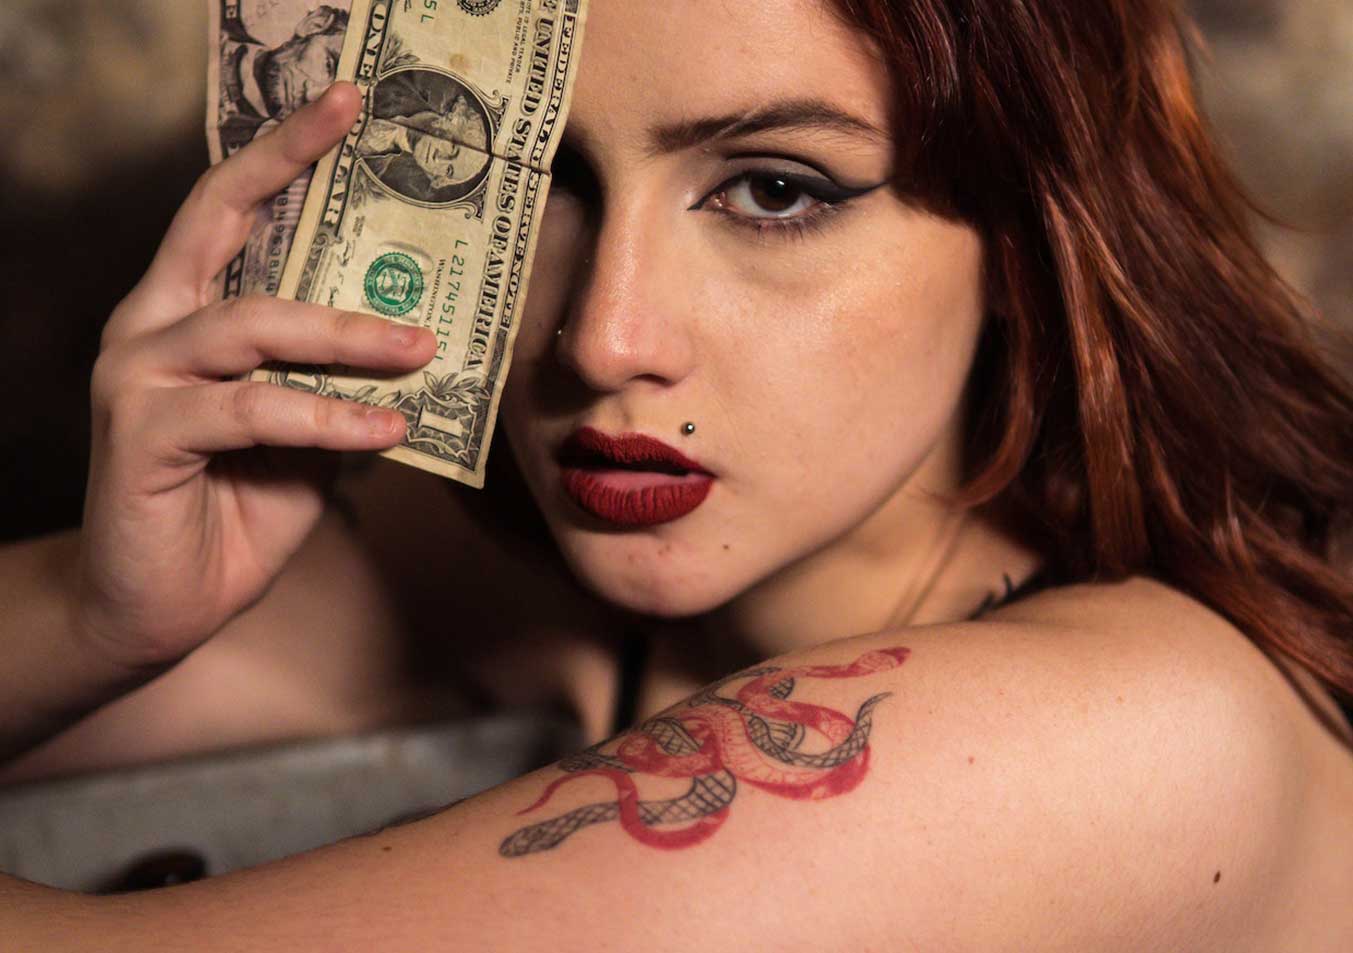 Money Bag Tattoos: Wealth, Ambition, and Artistry | Art and Design